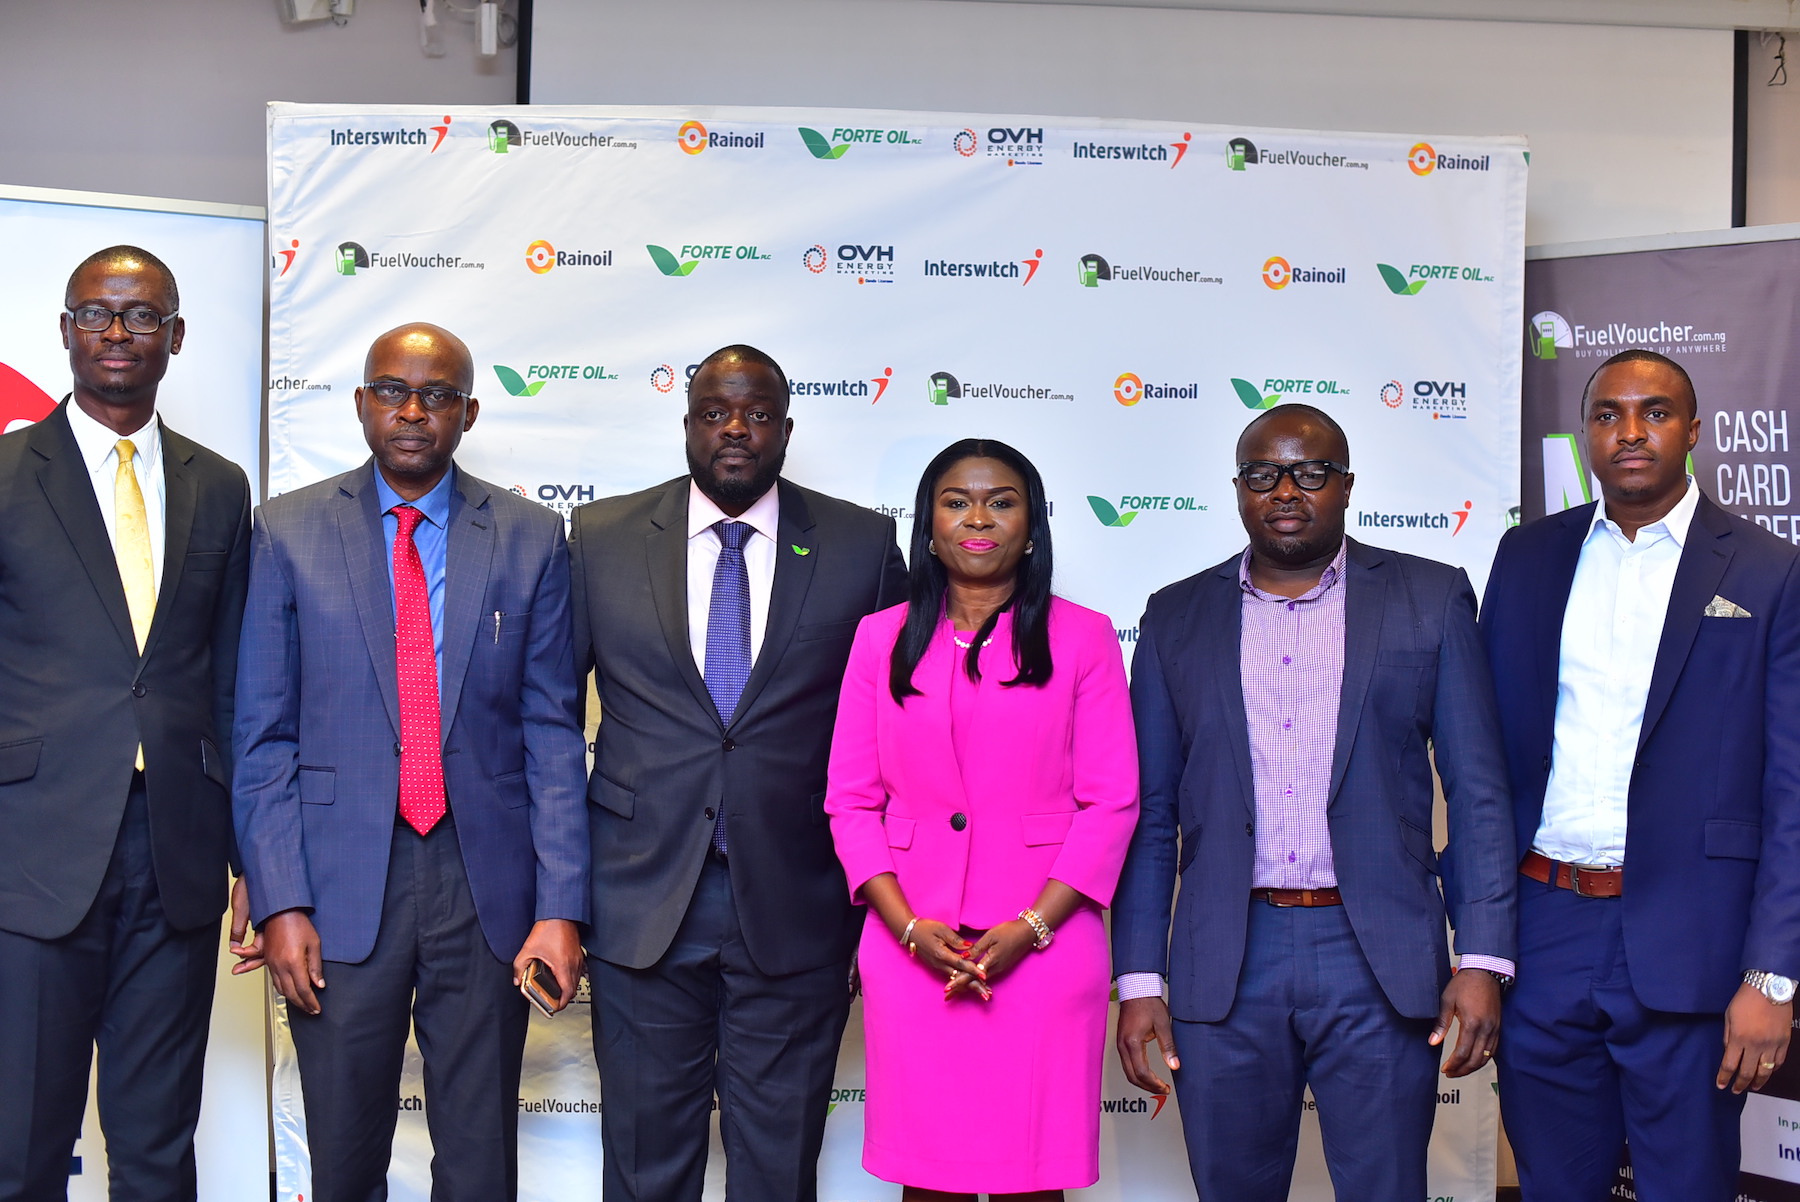 L-R: Babafemi Olabiyi, Head of Sales at OVH Energy Marketing; Kenneth Ndabai, Executive Director Operations at RainOil; Tunde Pratt, Head of Supply, Trading and Depot Operations at Forte Oil; Chinyere Don-Okhuofu, Divisional CEO of Interswitch Industry Vertical Markets; Chimezie Emewulu, CEO, Seamfix/EVSL and Chibuzor Onwurah, Co-founder Seamfix/EVSL